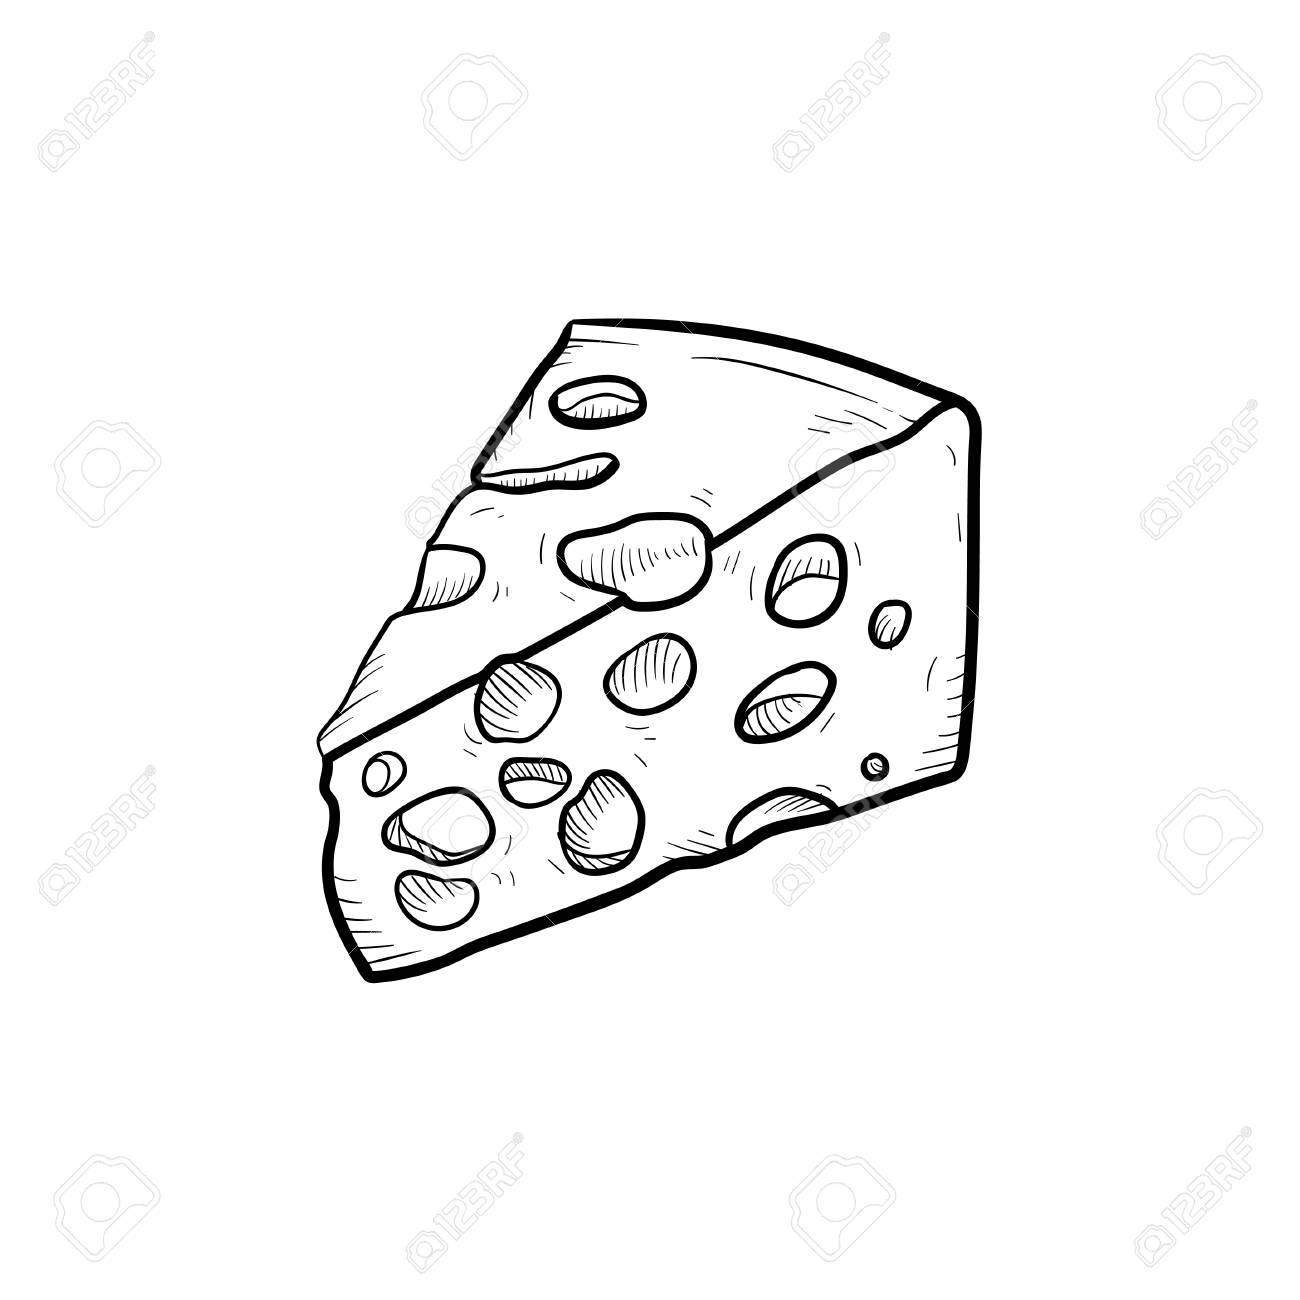 Drawn cheese outline.